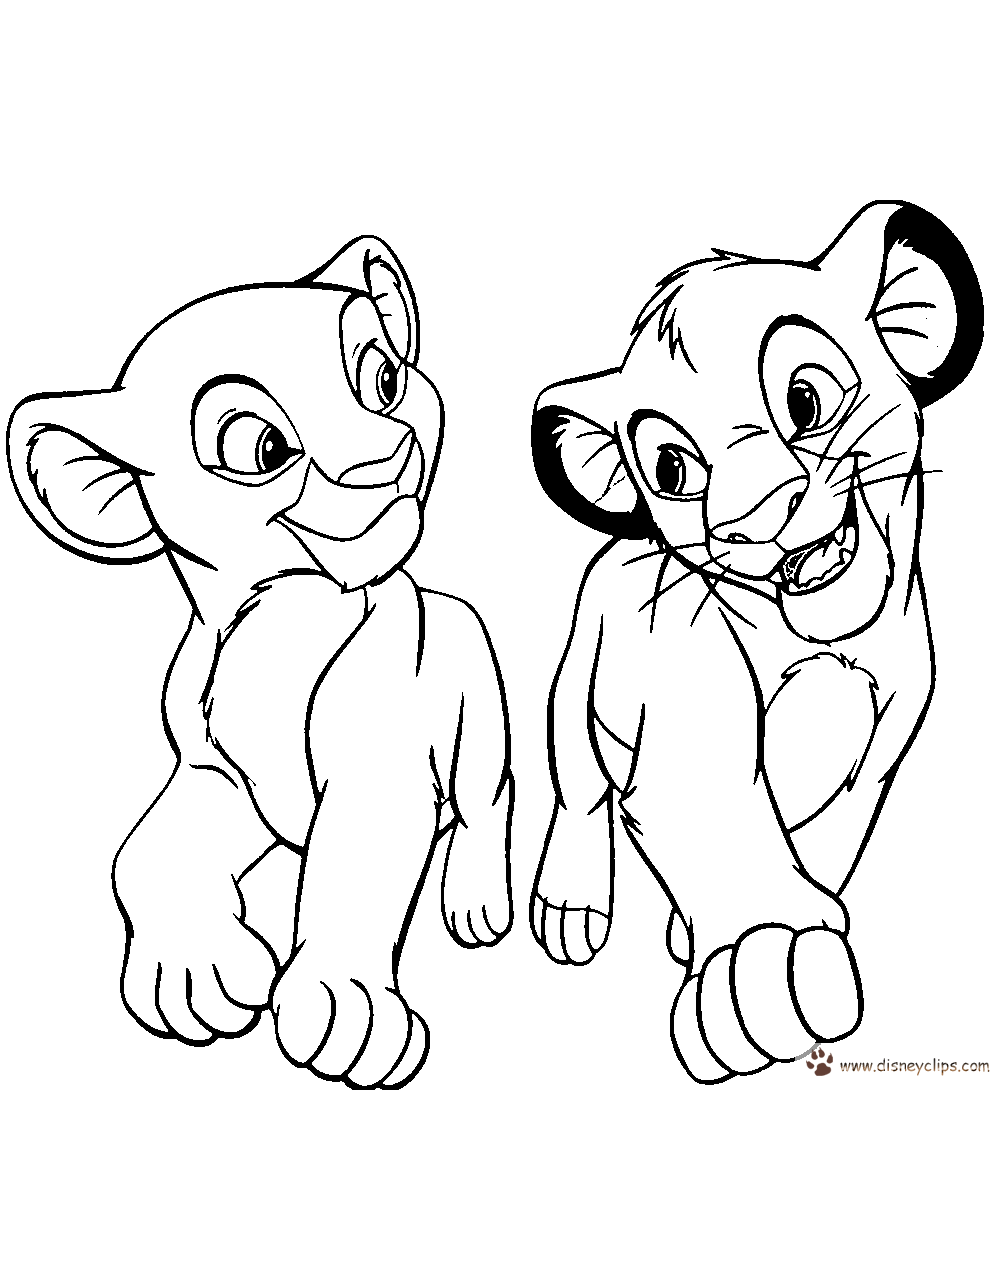 The Lion King Coloring Pages 2 Disneyclips Com Coloring Home